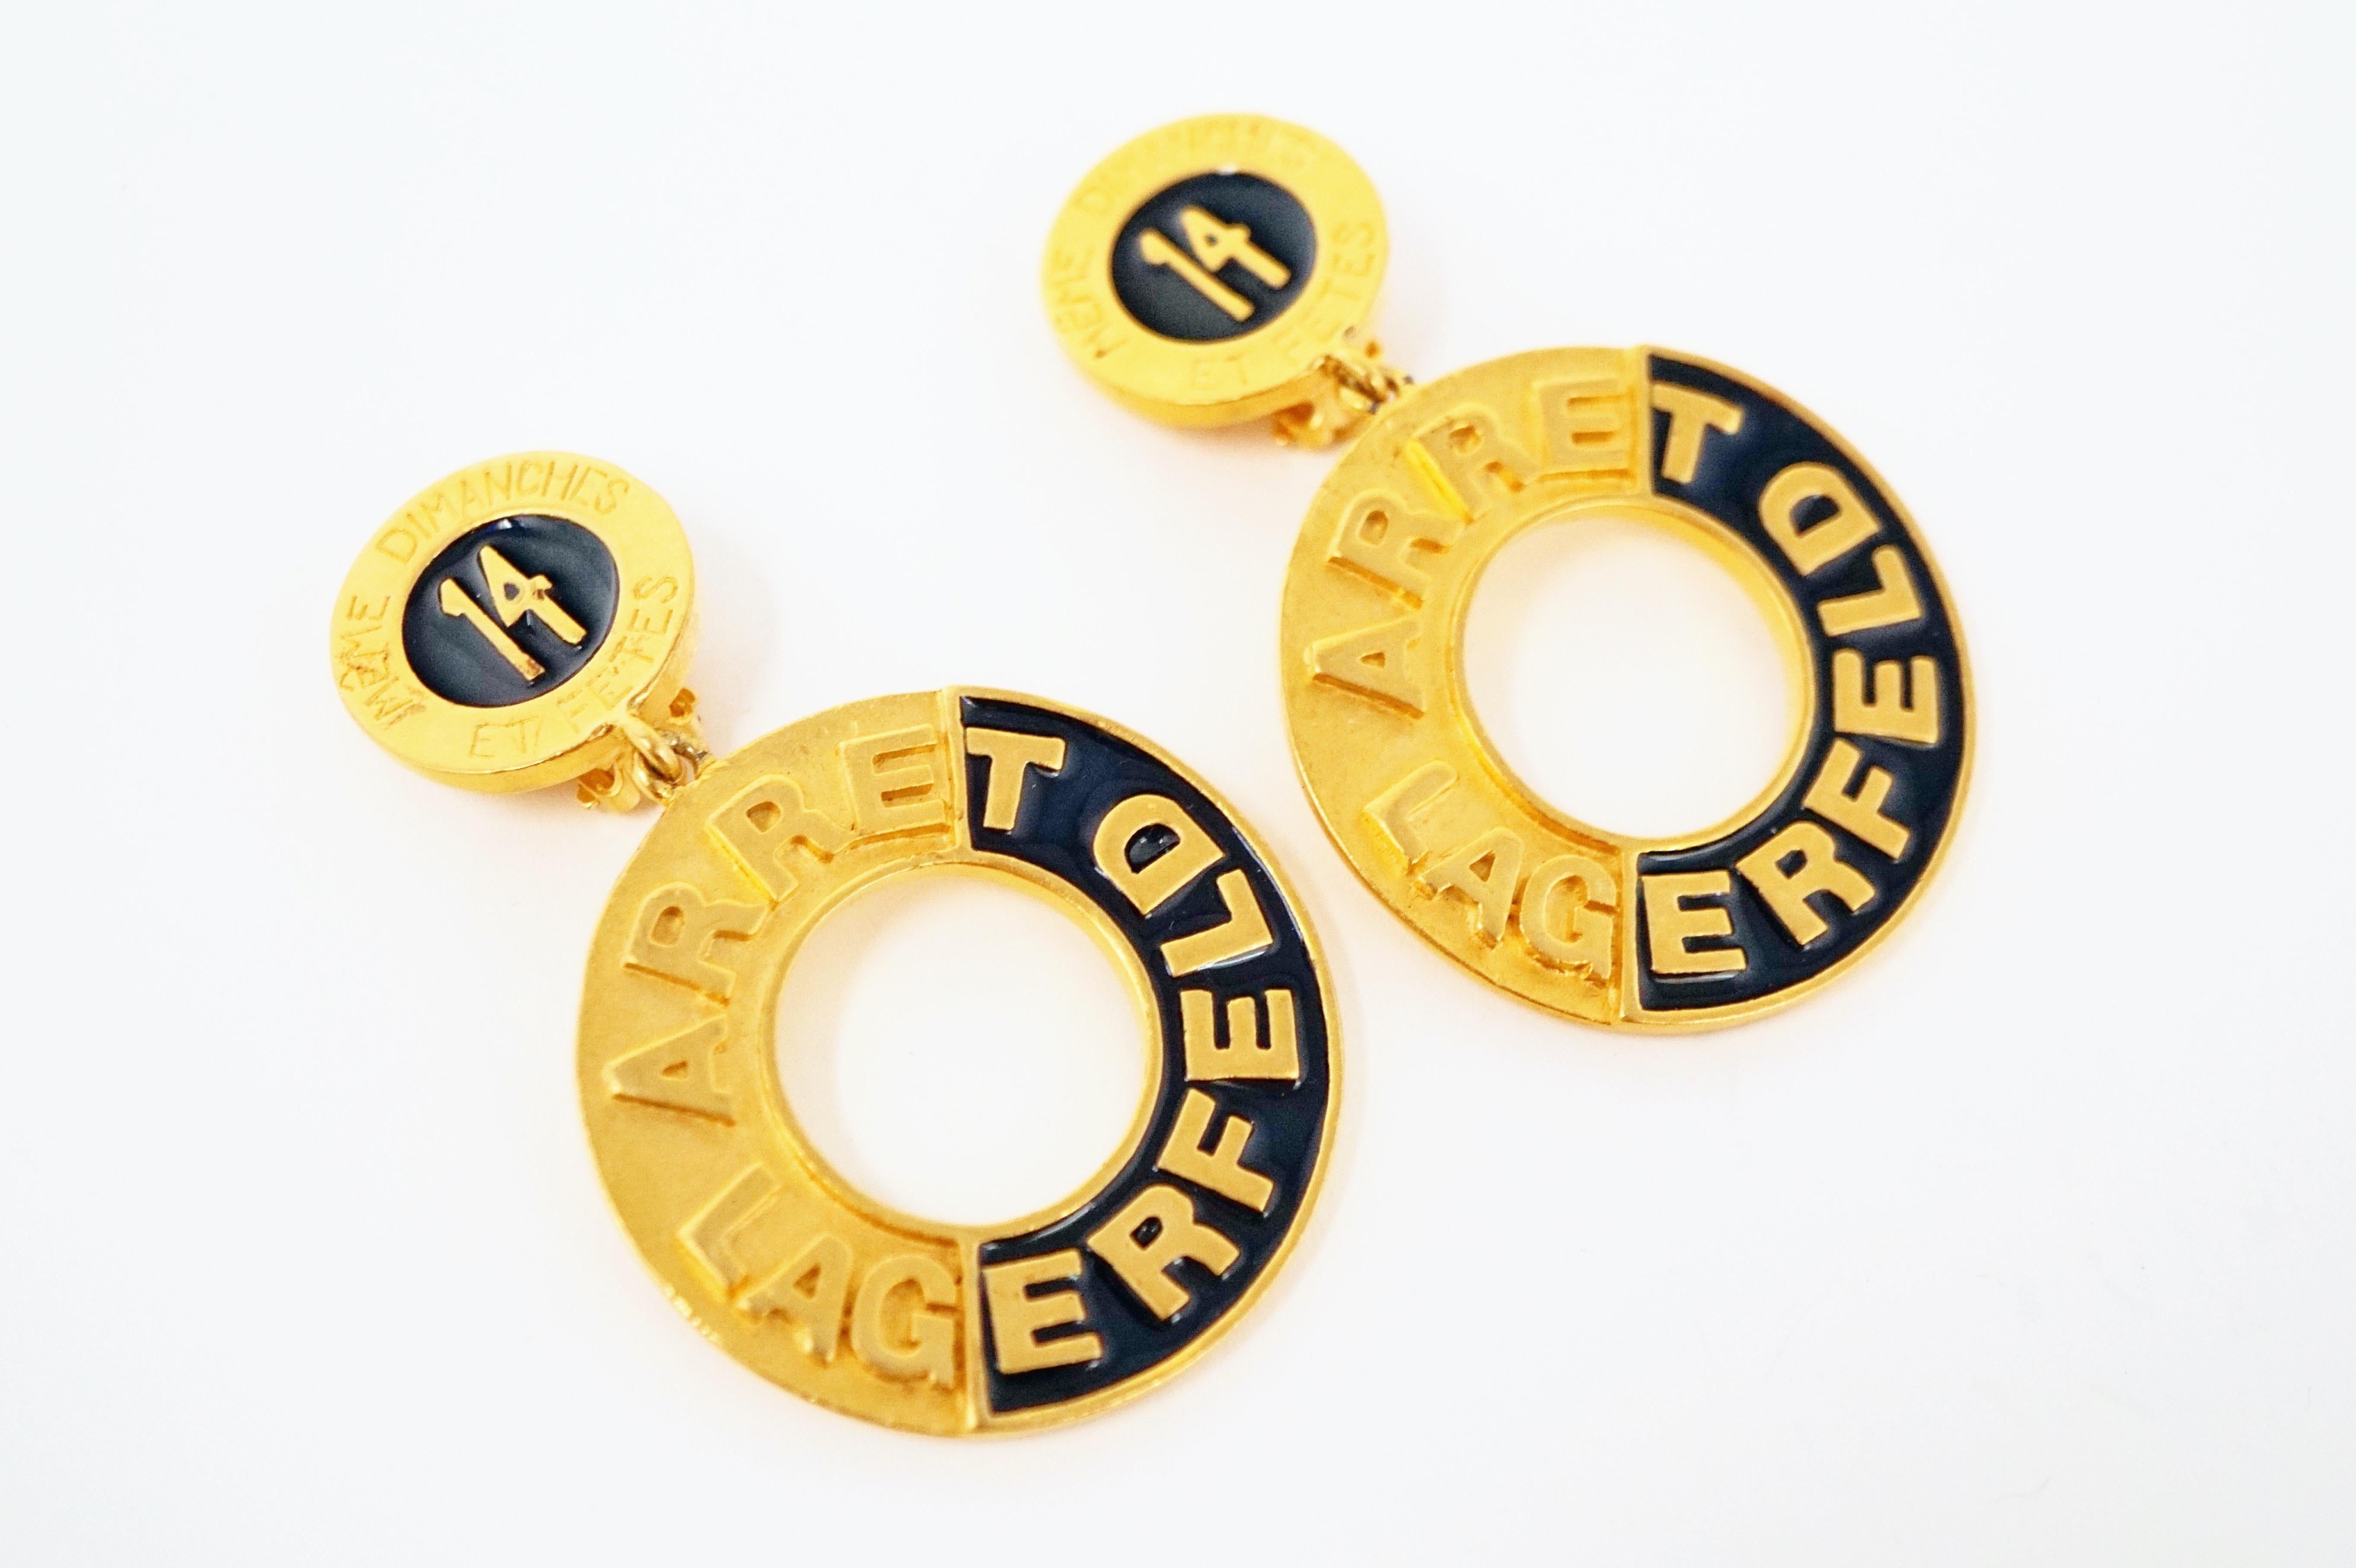 Vintage Oversized Karl Lagerfeld Parisian Office Address Hoop Earrings, 1980s In Excellent Condition For Sale In McKinney, TX